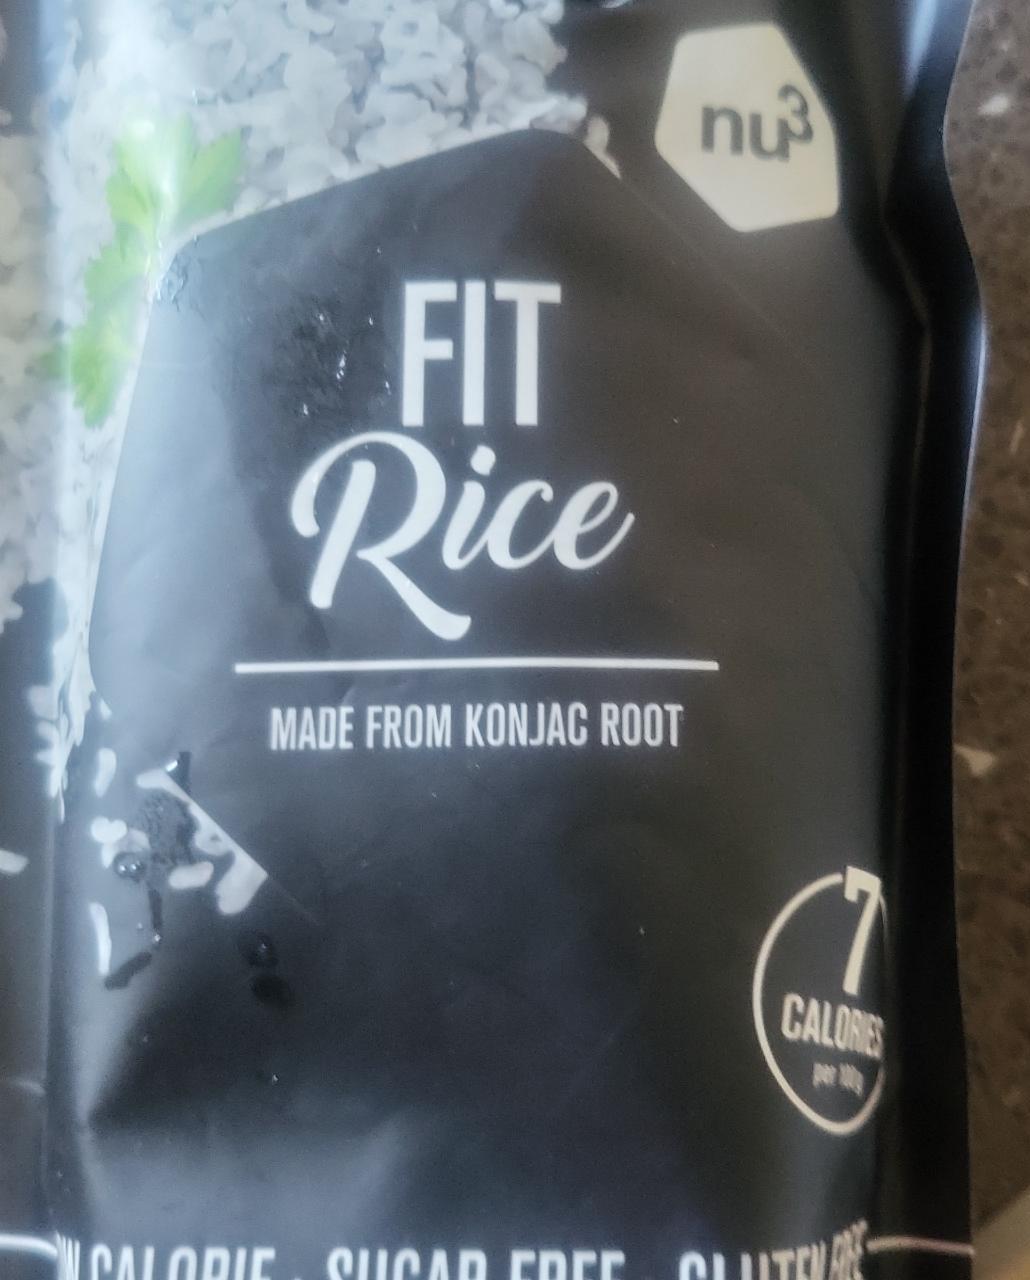 Fotografie - Fit Rice made from konjac root Nu3